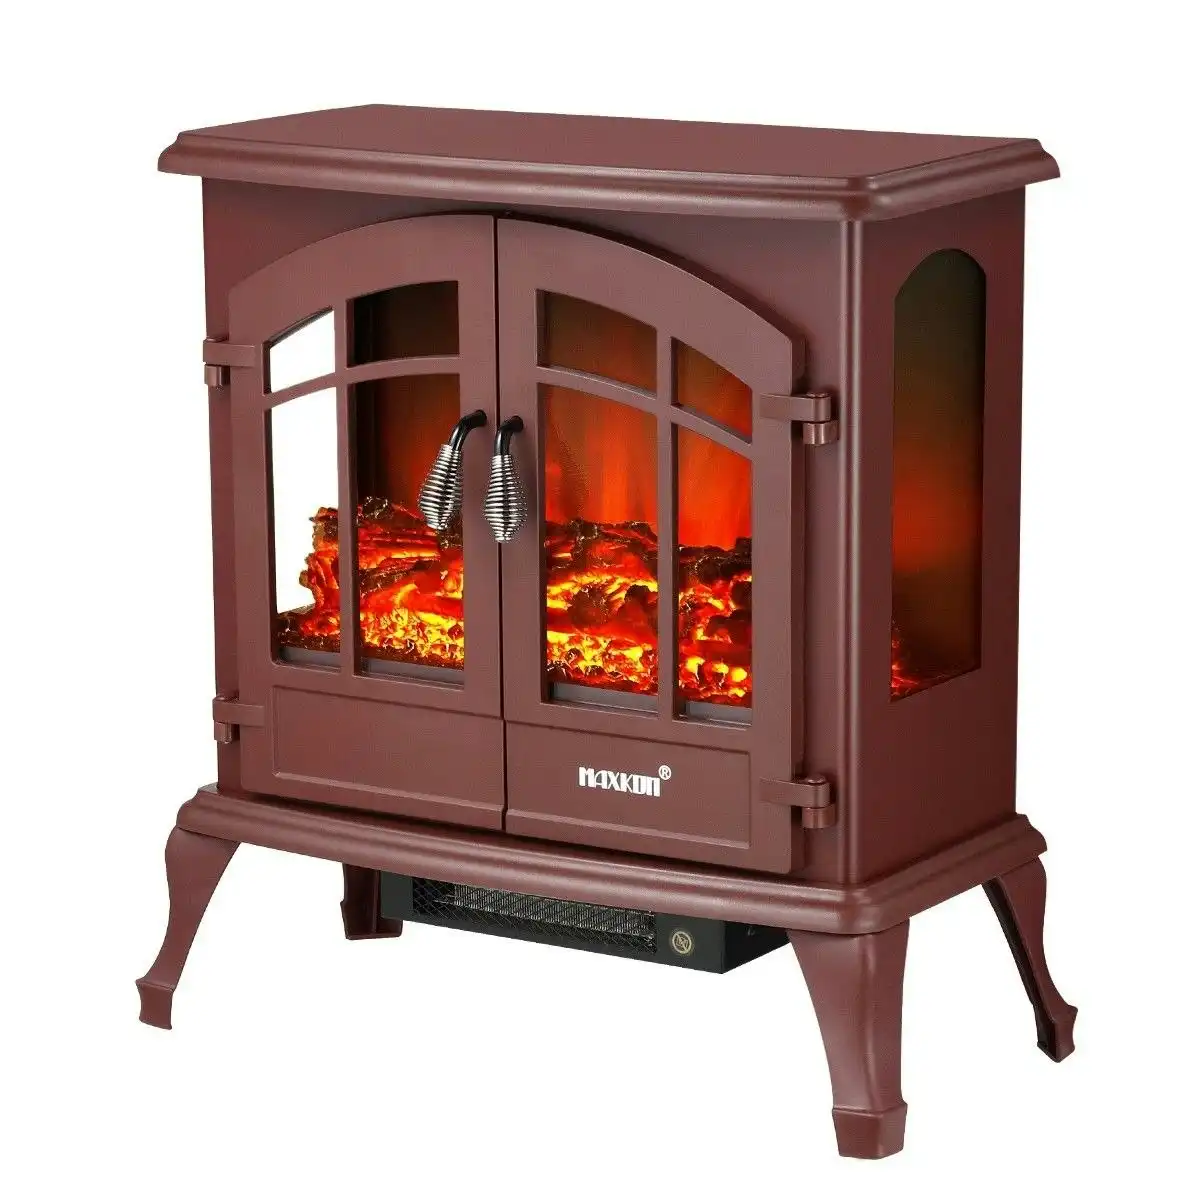 Maxkon 22 Inch 1800W Freestanding Electric Fireplace Stove Realistic LED Flame Effect Thermostat